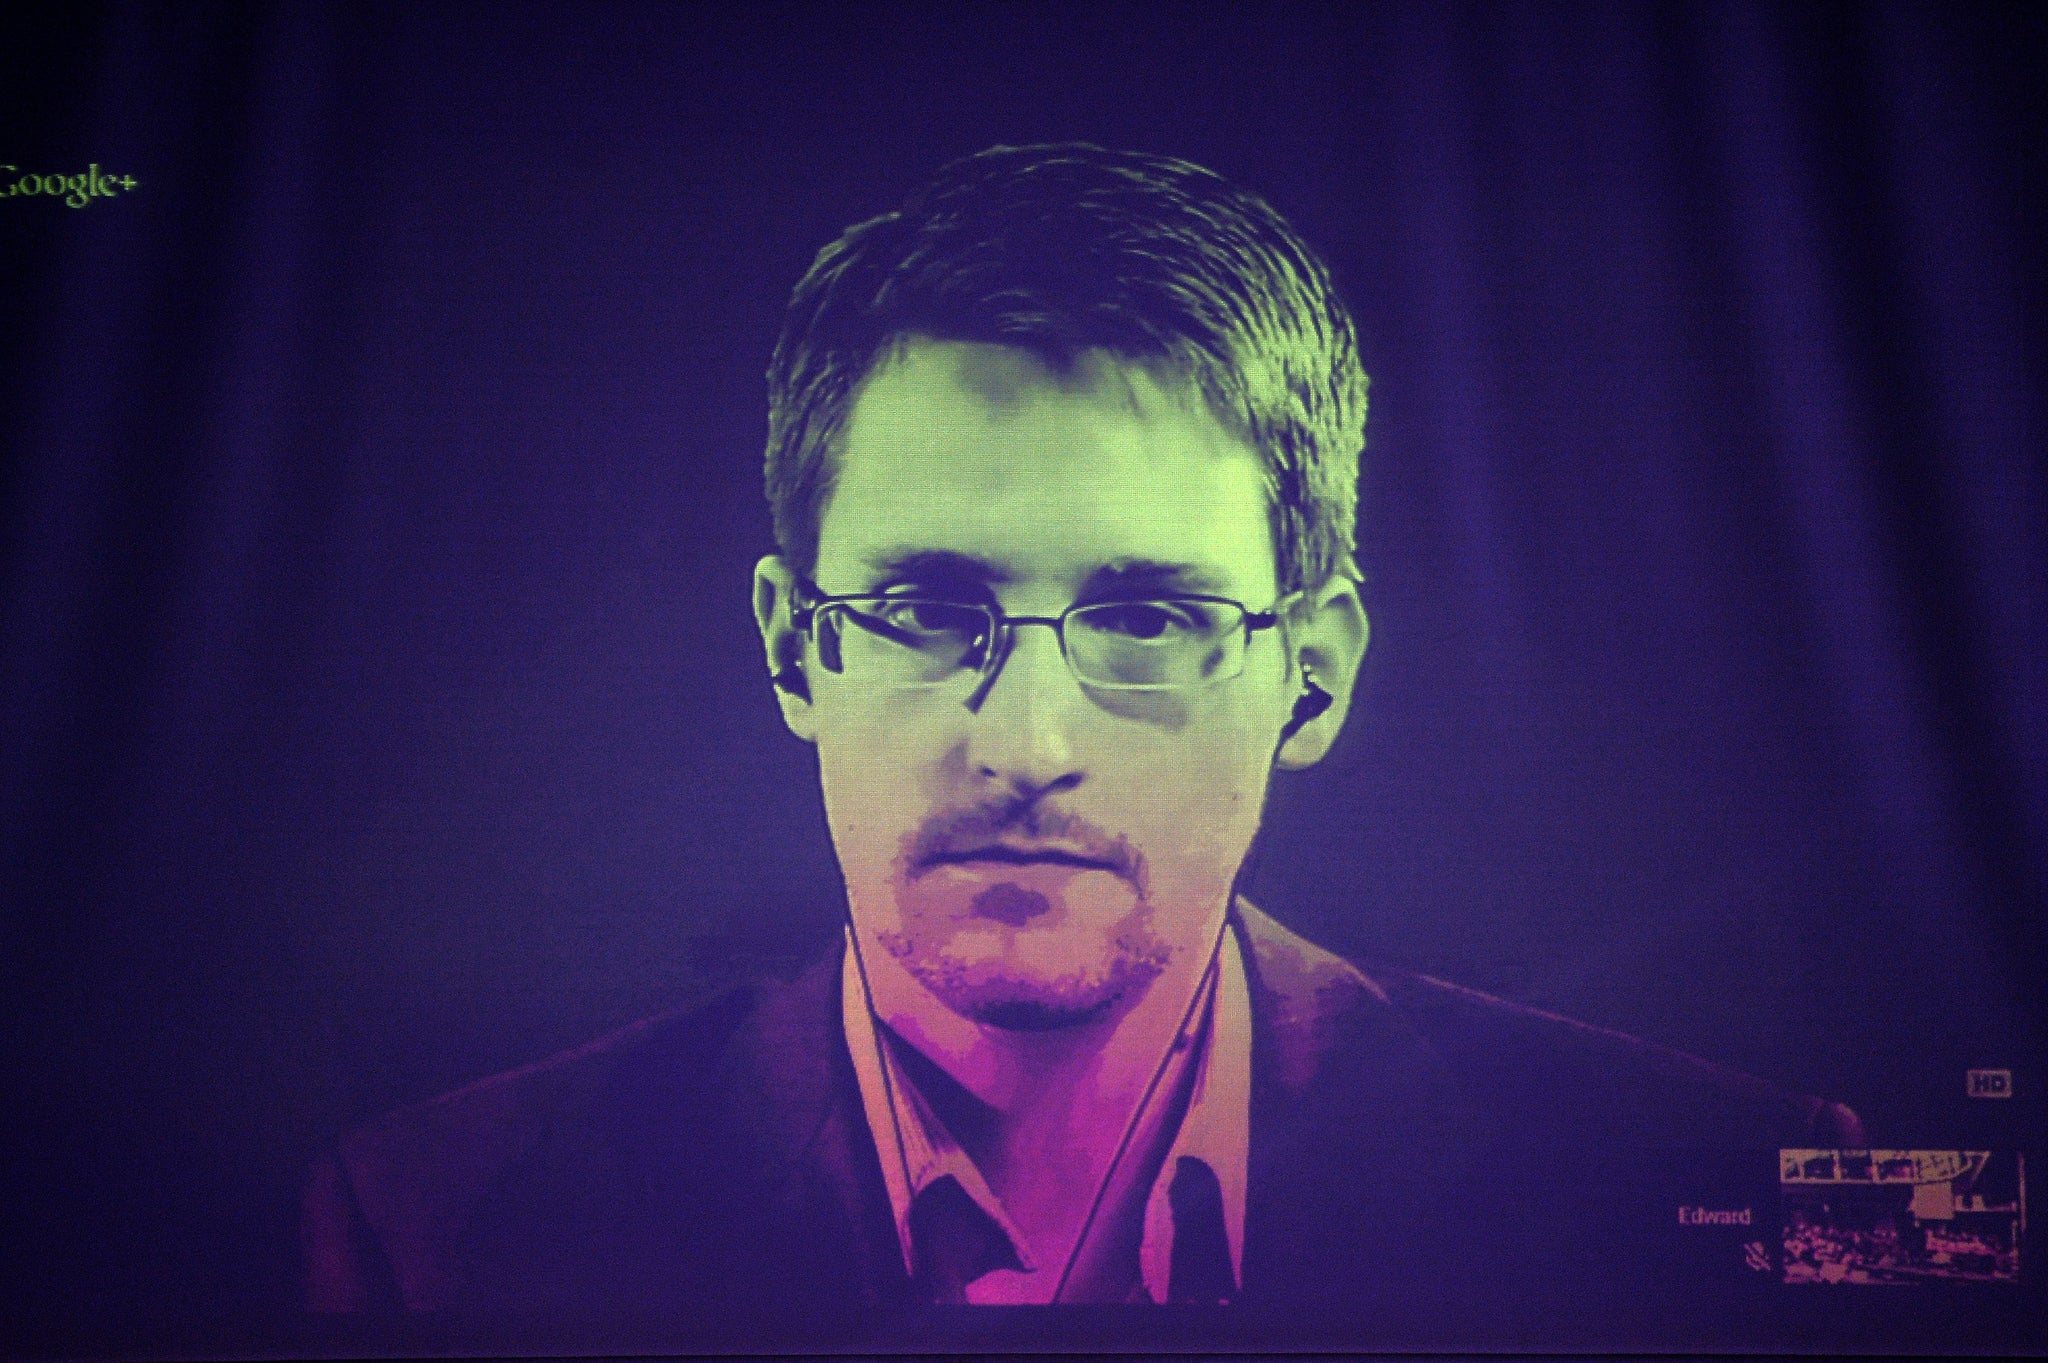 NSA whistleblower Edward Snowden has encouraged people to use encryption in their online communications